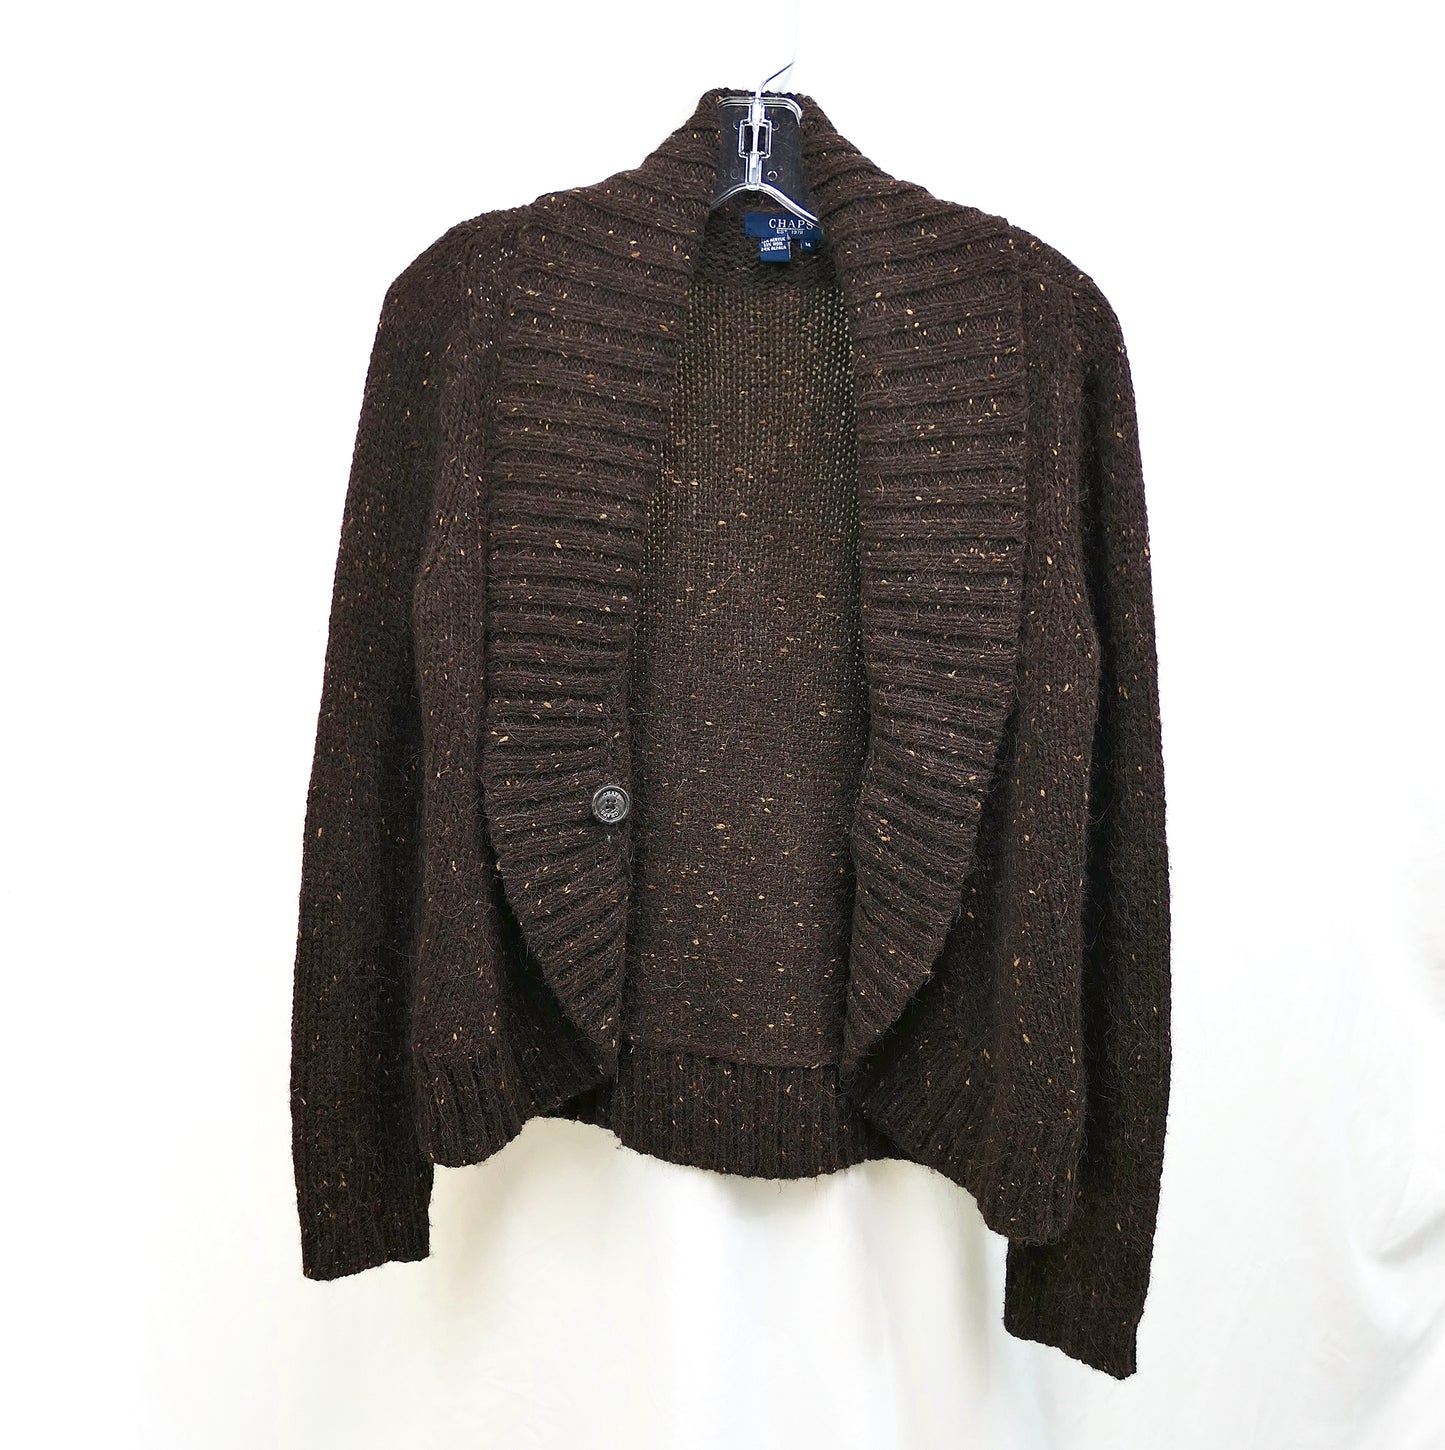 Chaps Brown Knit Sweater - Size M